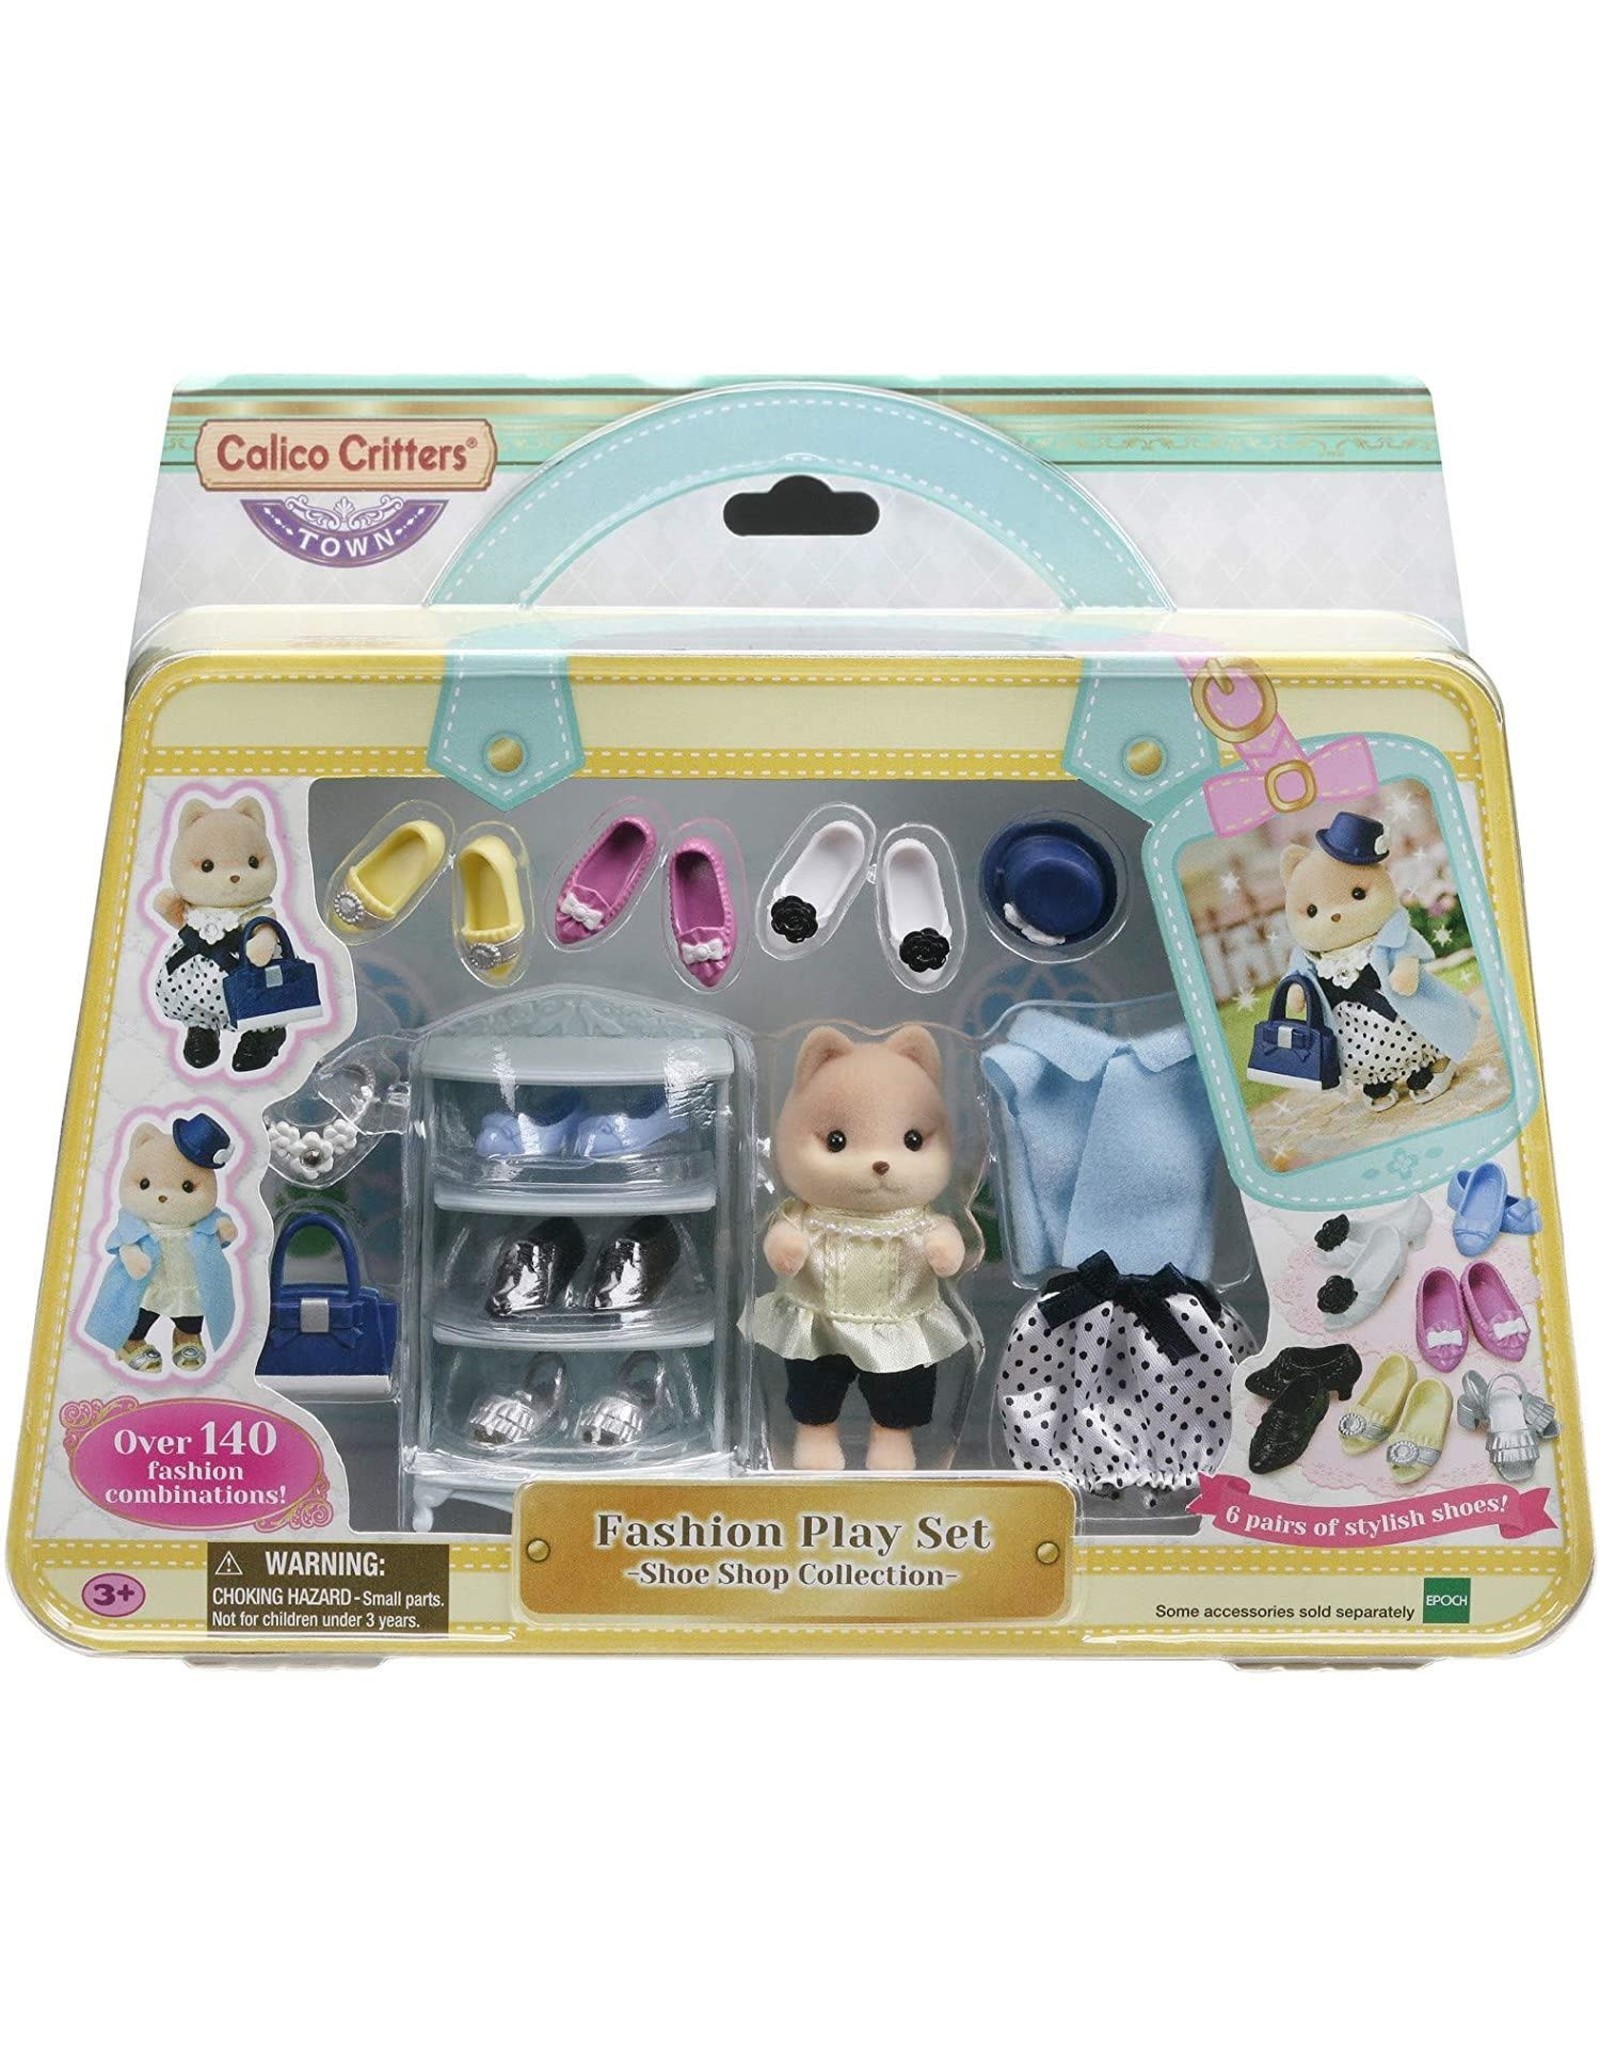 Calico Critters Calico Critters Fashion Play Set Shoe Shop Collection